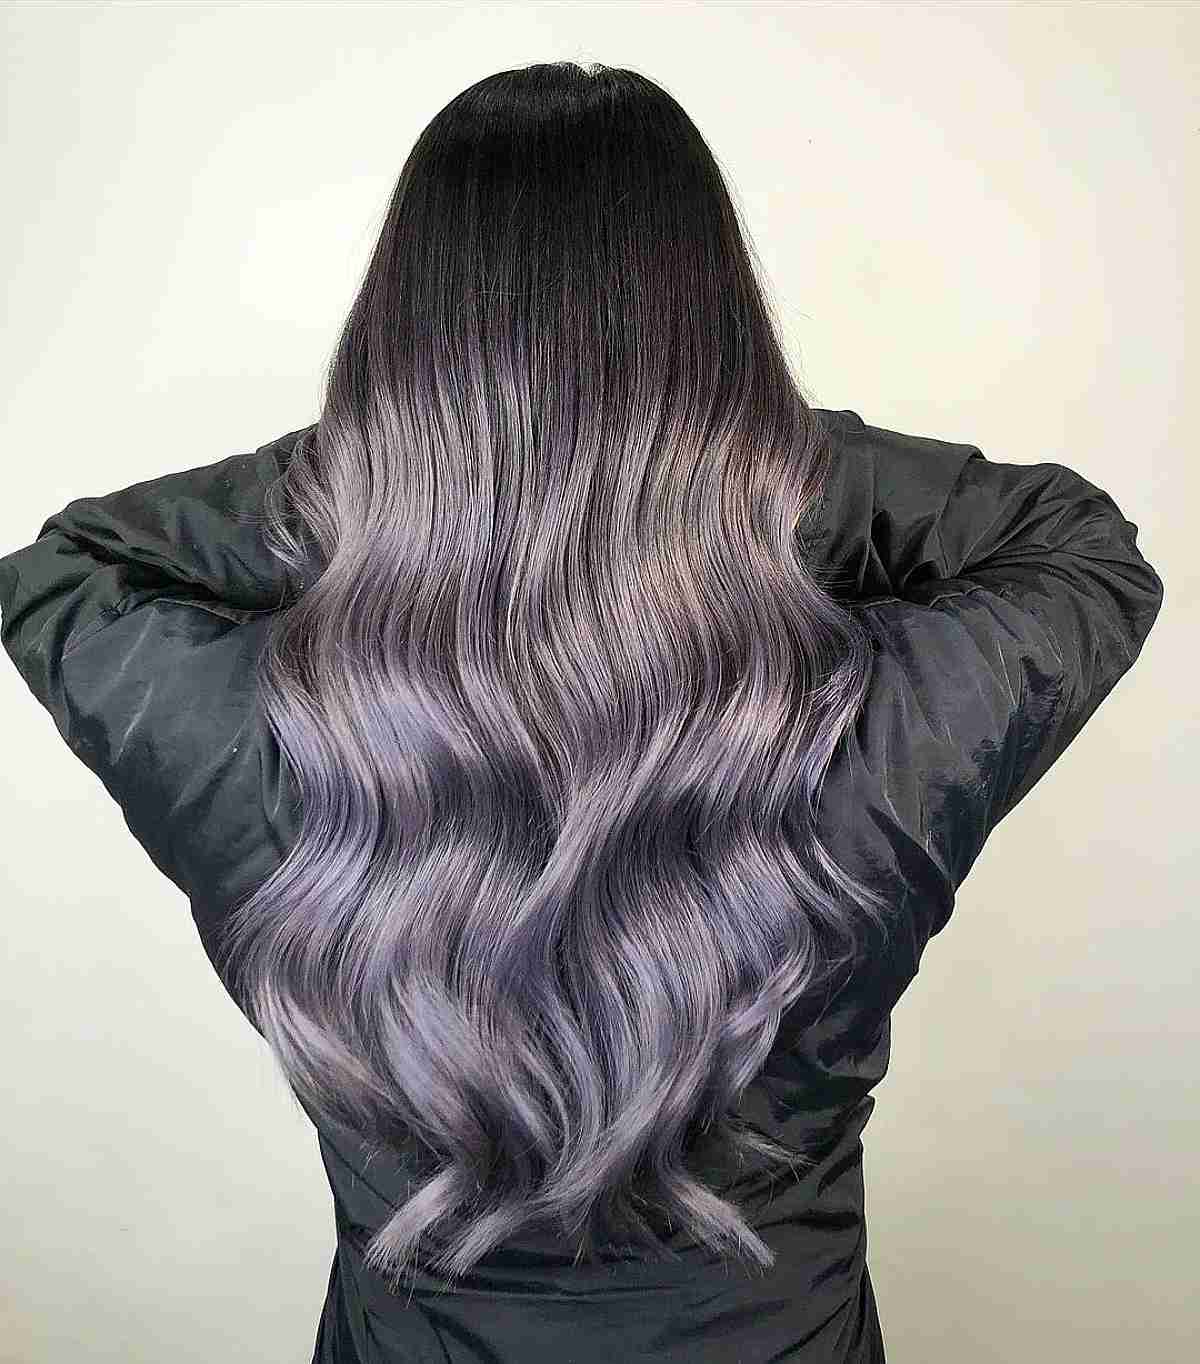 45 Hottest Ombre Hair Color Ideas of 2023